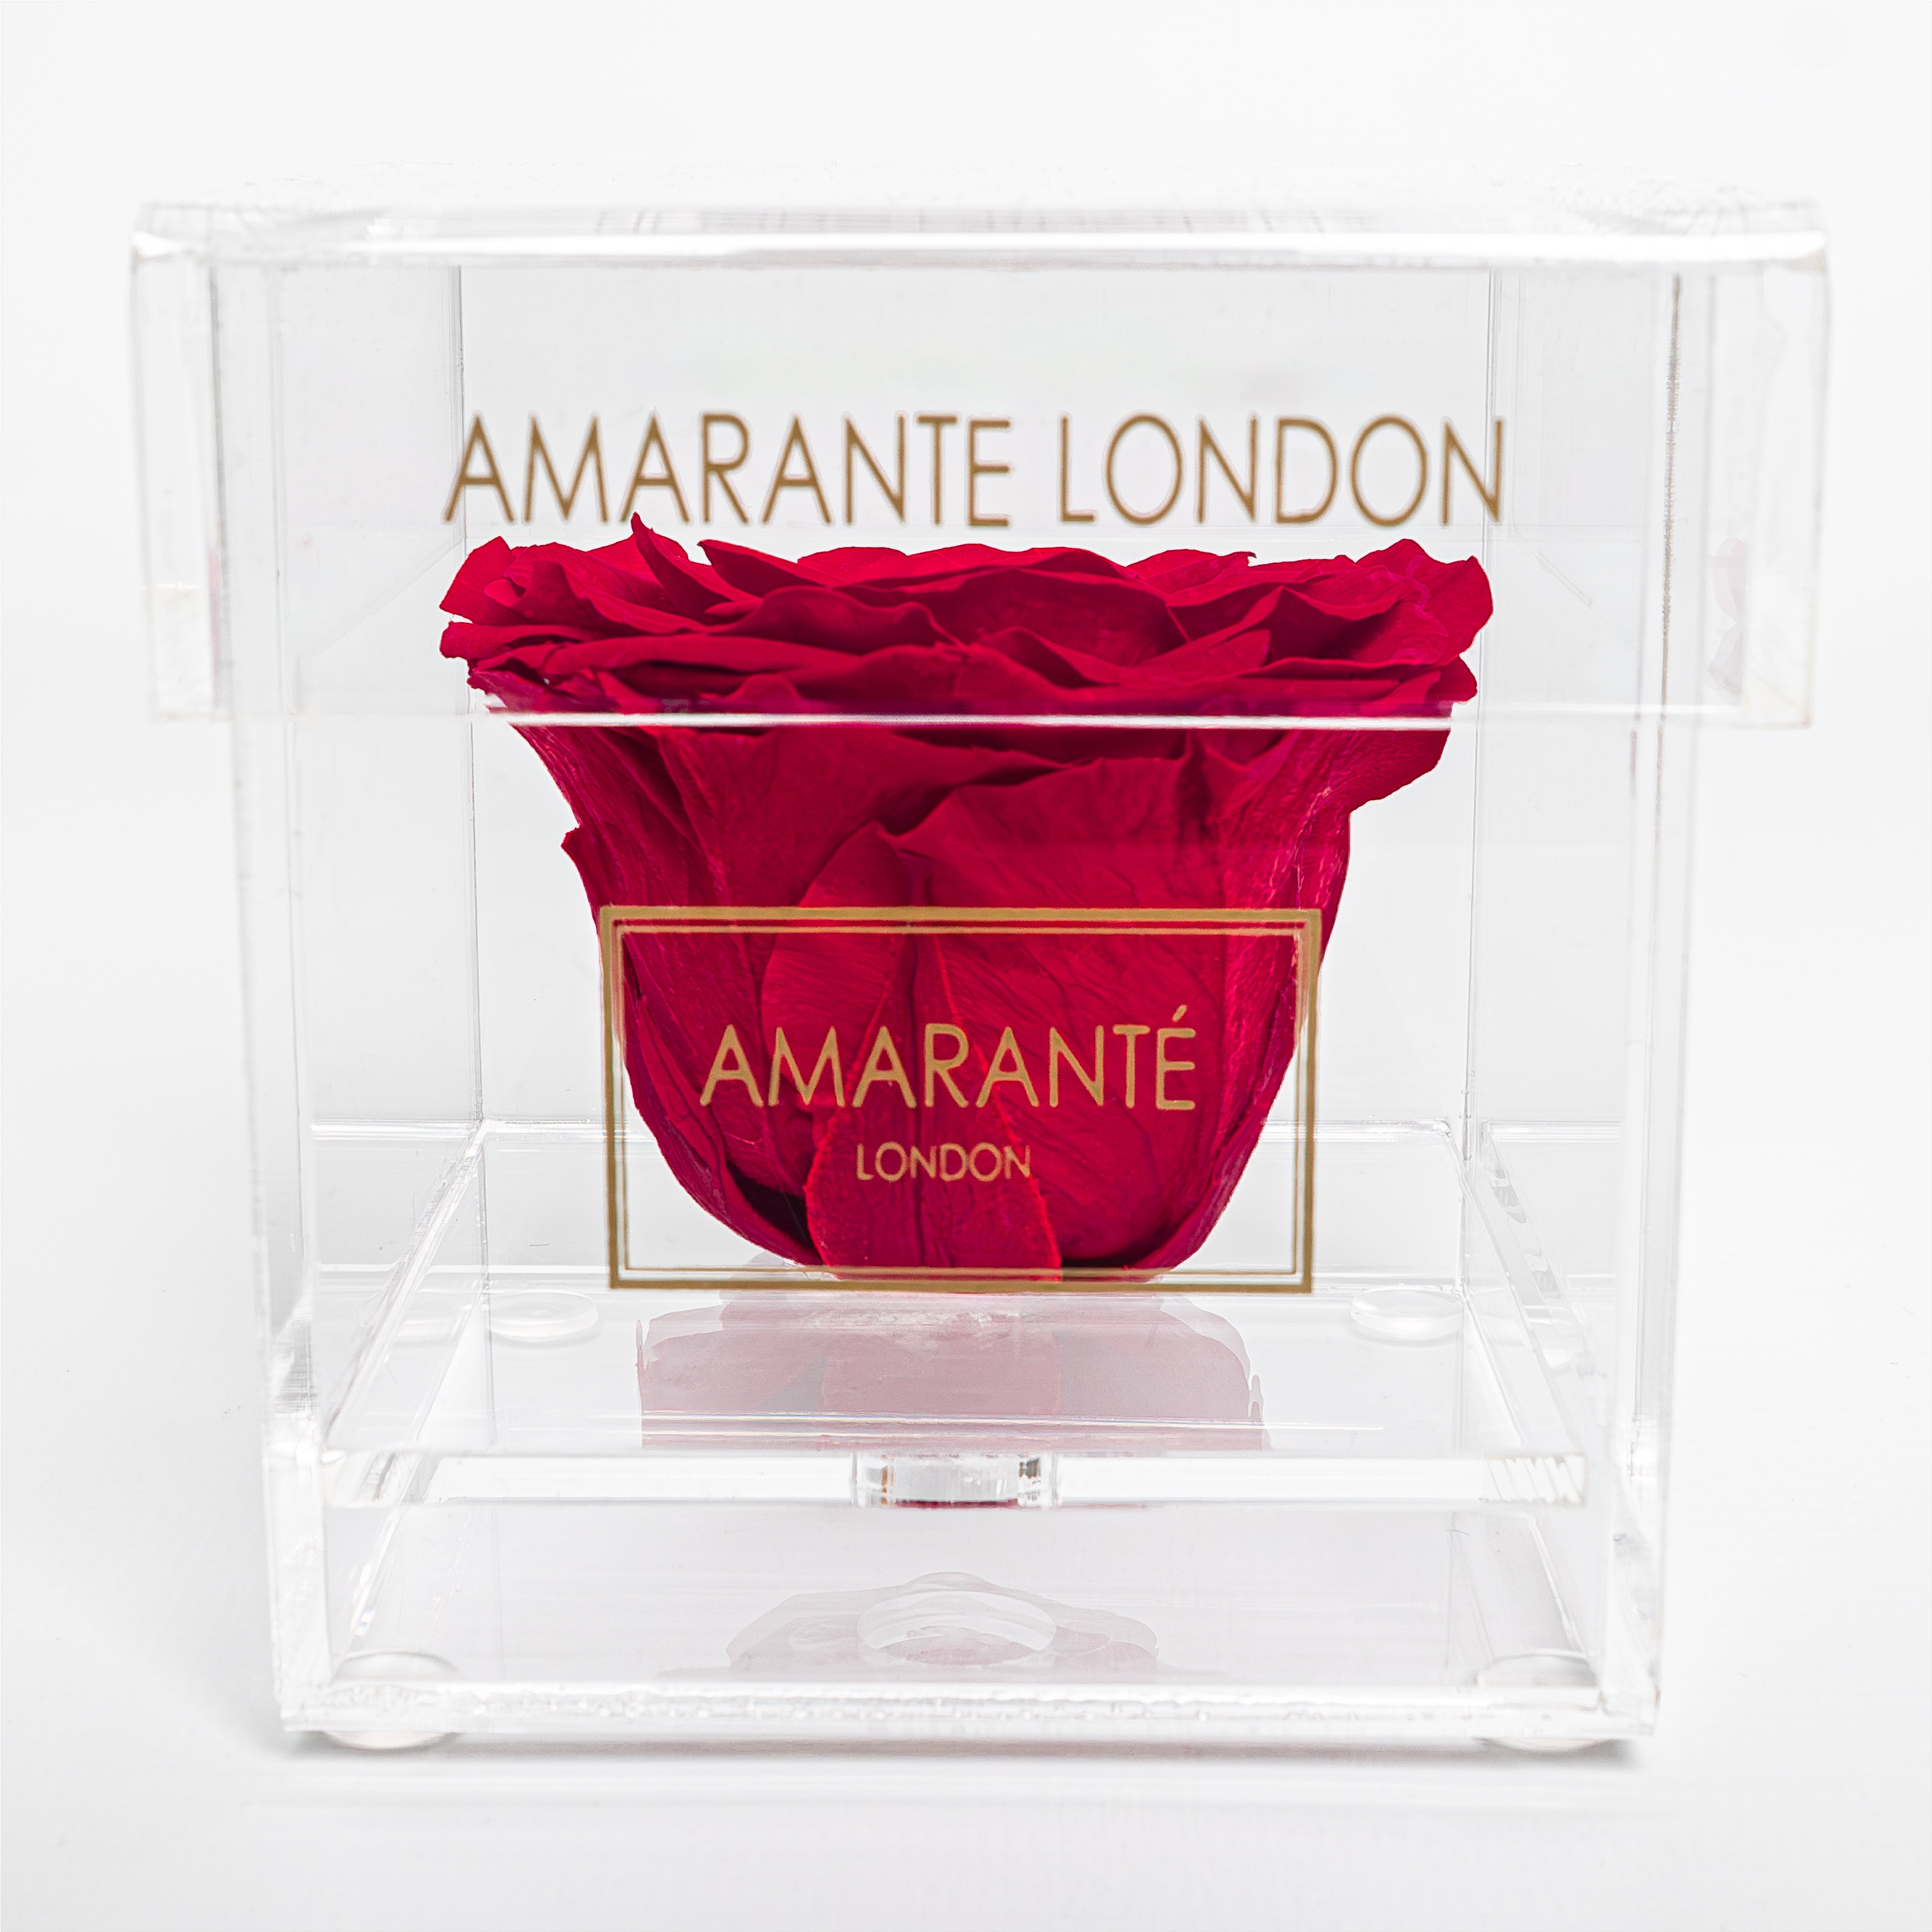 Acrylic Jewellery Box Featuring an Extra Large Red Infinity Rose in the Shape of a Heart